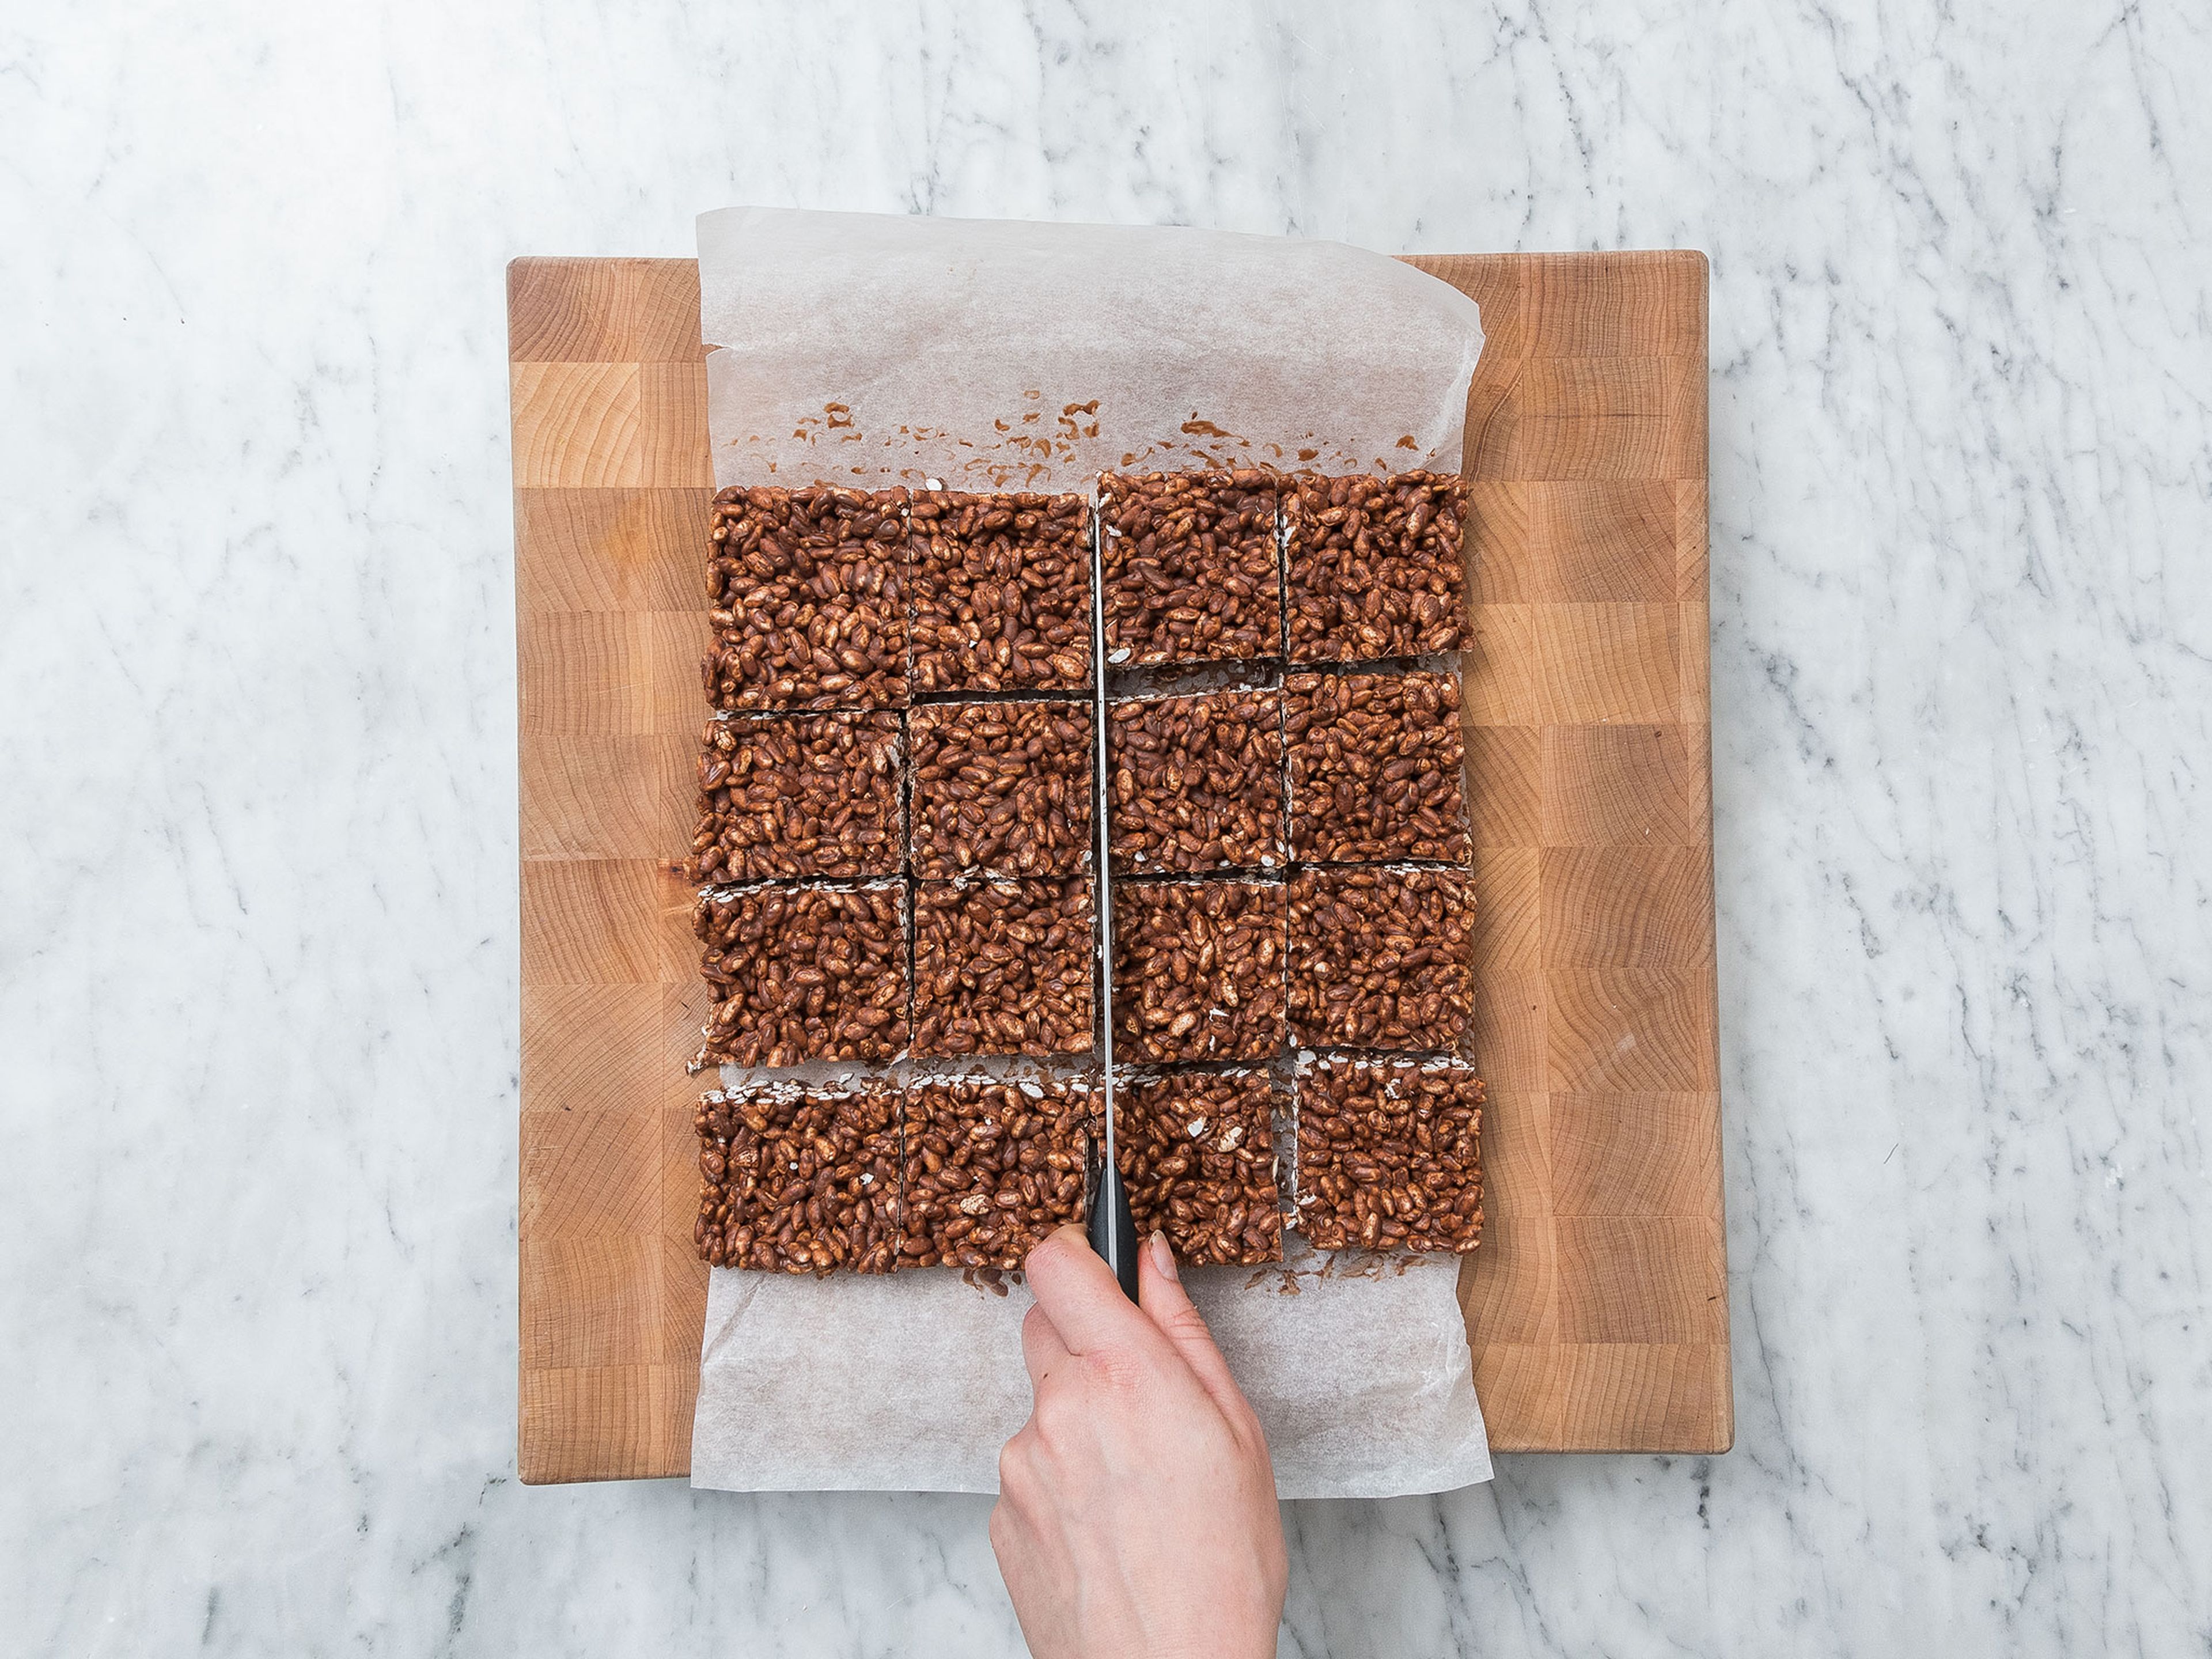 Cut cooled chocolate rice krispies into equal-sized pieces and enjoy!